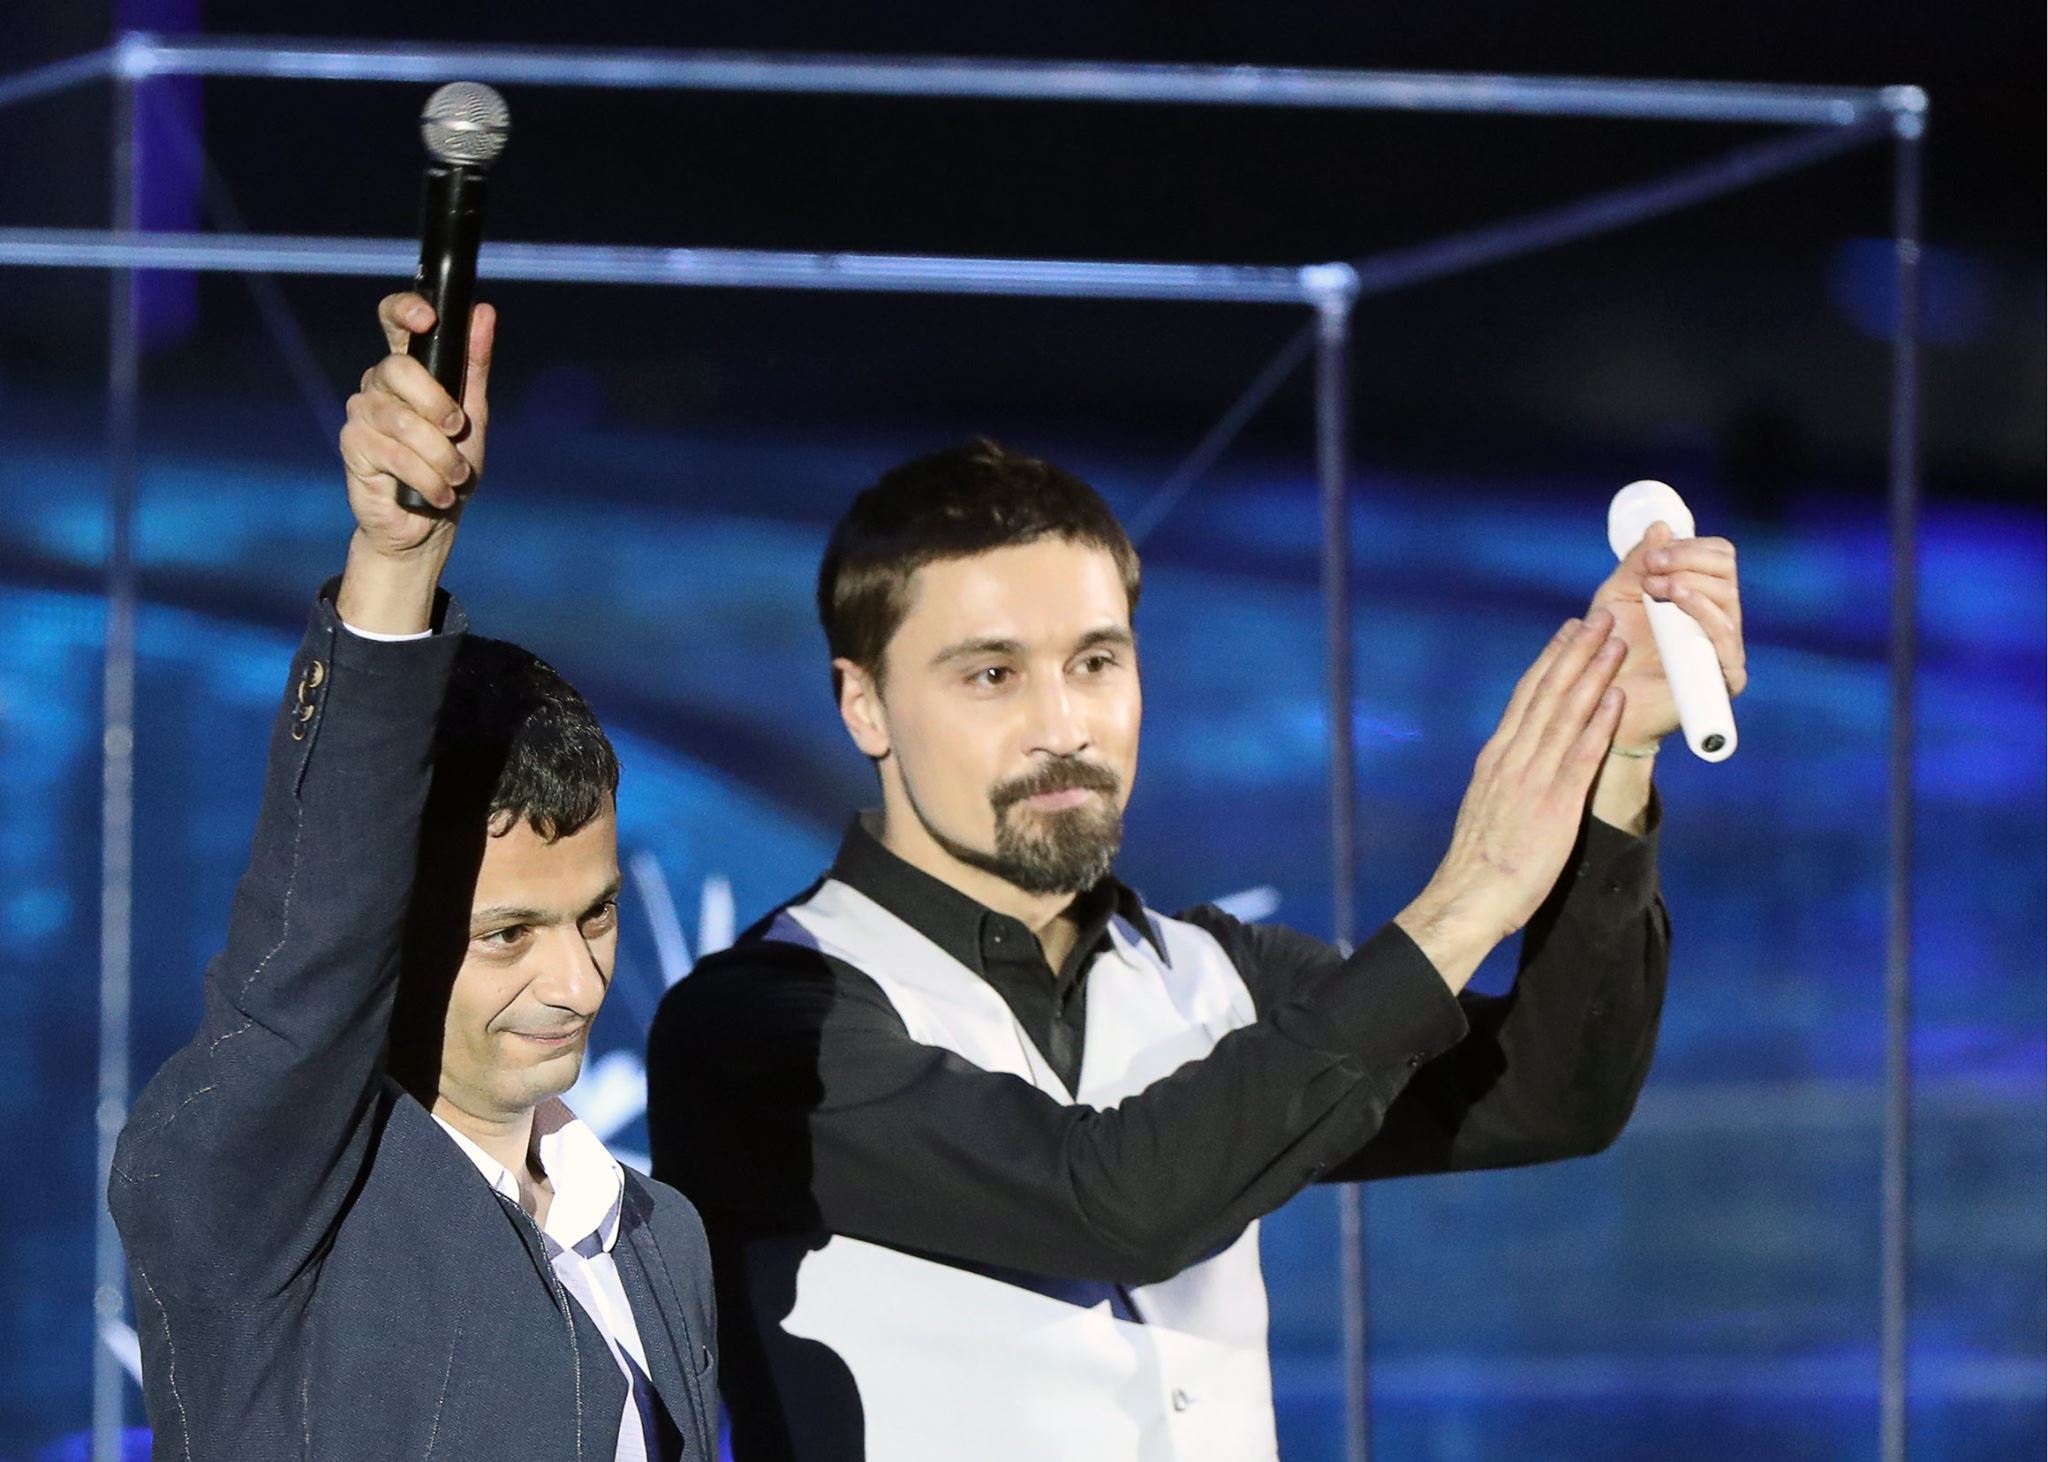 Professor Artem Oganov (left) waves to the audience alongside popstar Dima Bilan during the opening ceremony of the World Festival of Youth and Students in Sochi. Photo: Francesca Nesterenko // Facebook.